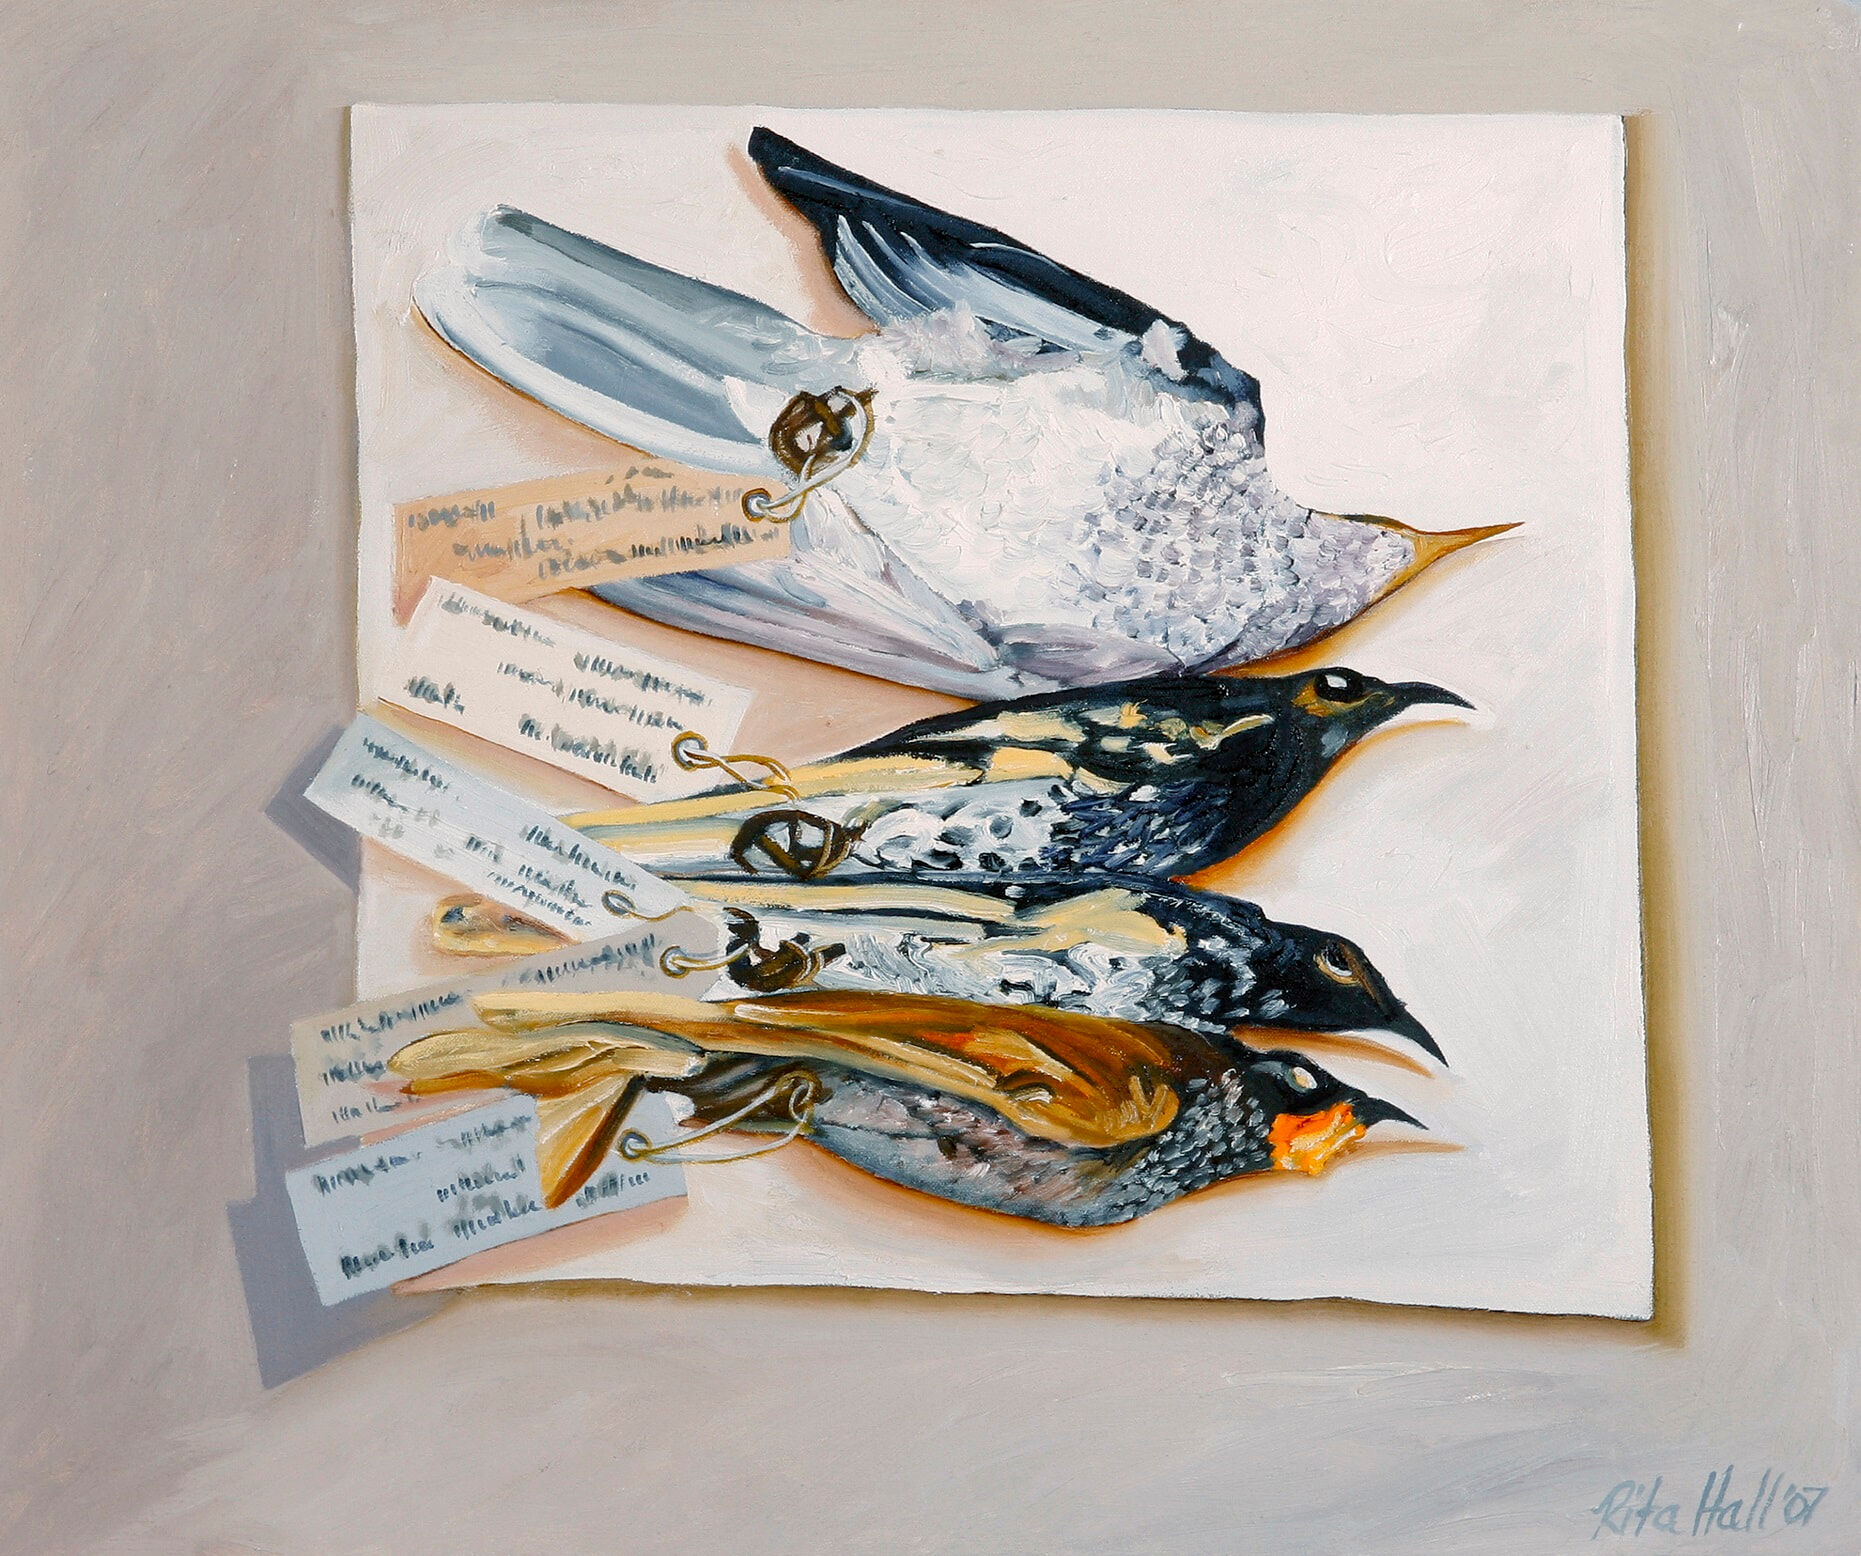 Four Small Honeyeaters 2007 Oil on canvas 51x61cm